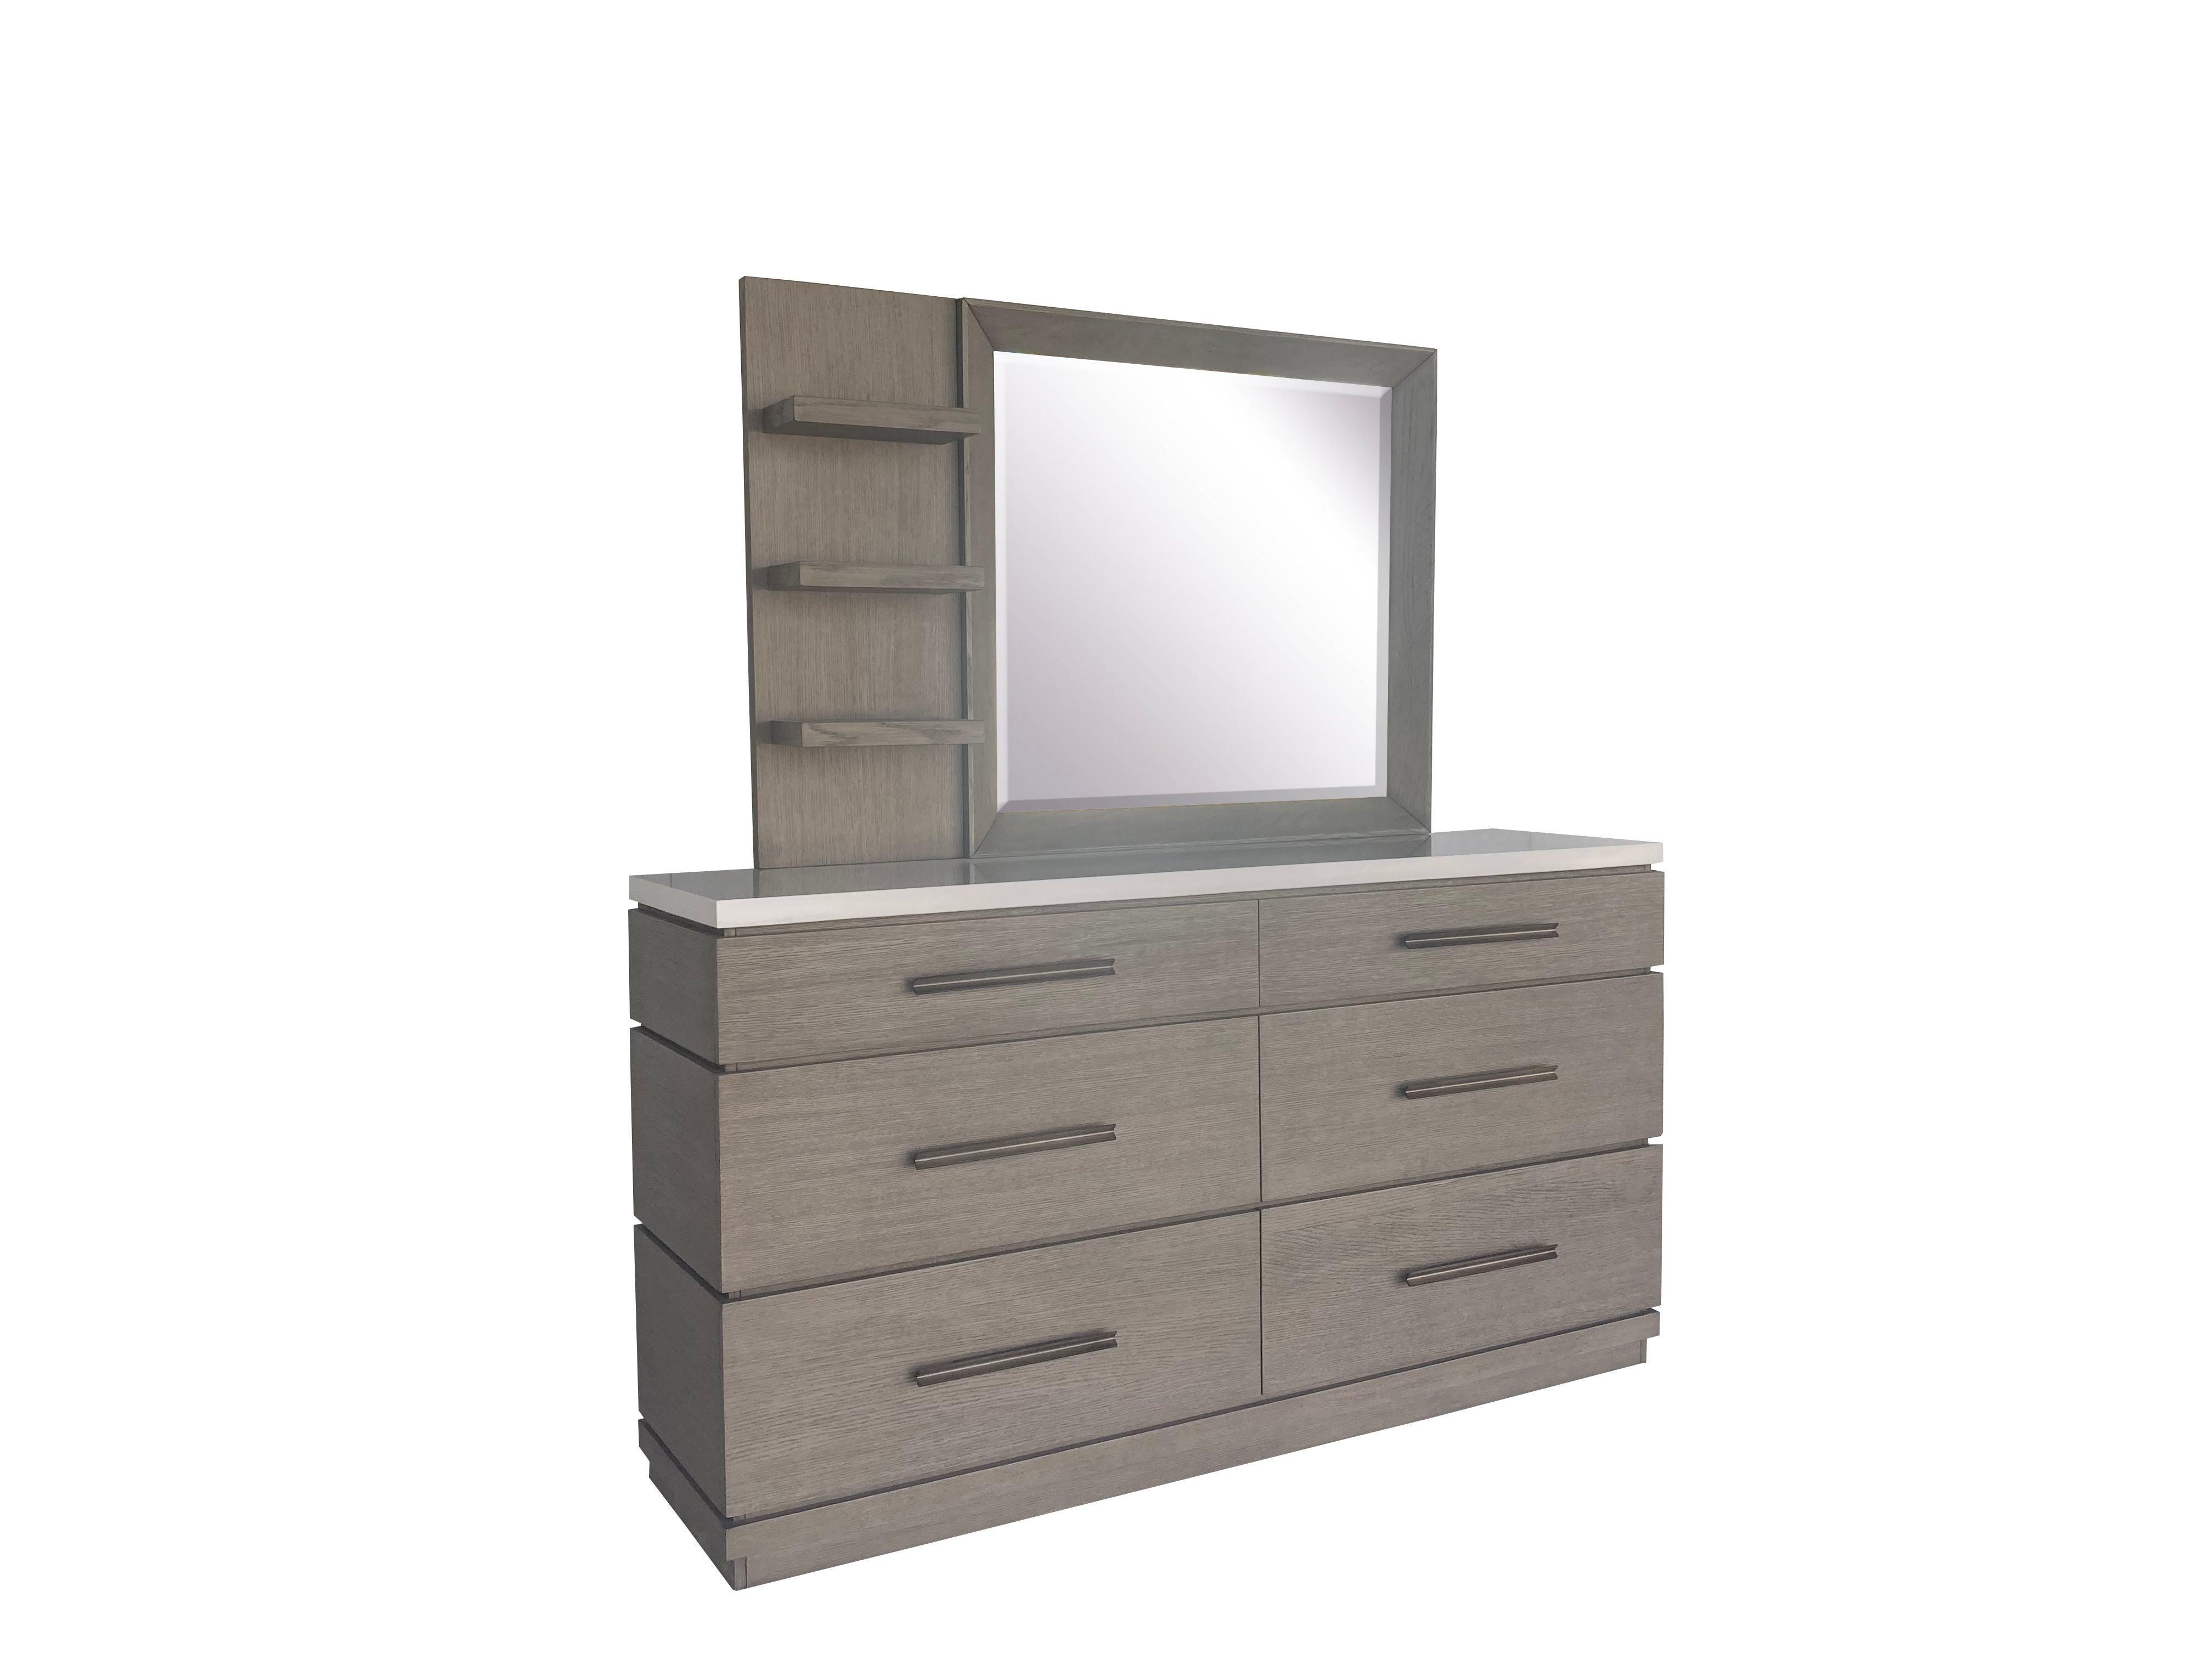 Parker House Furniture - Pure Modern Bedroom - 6 Drawer Dresser And Mirror - Moonstone - 5th Avenue Furniture